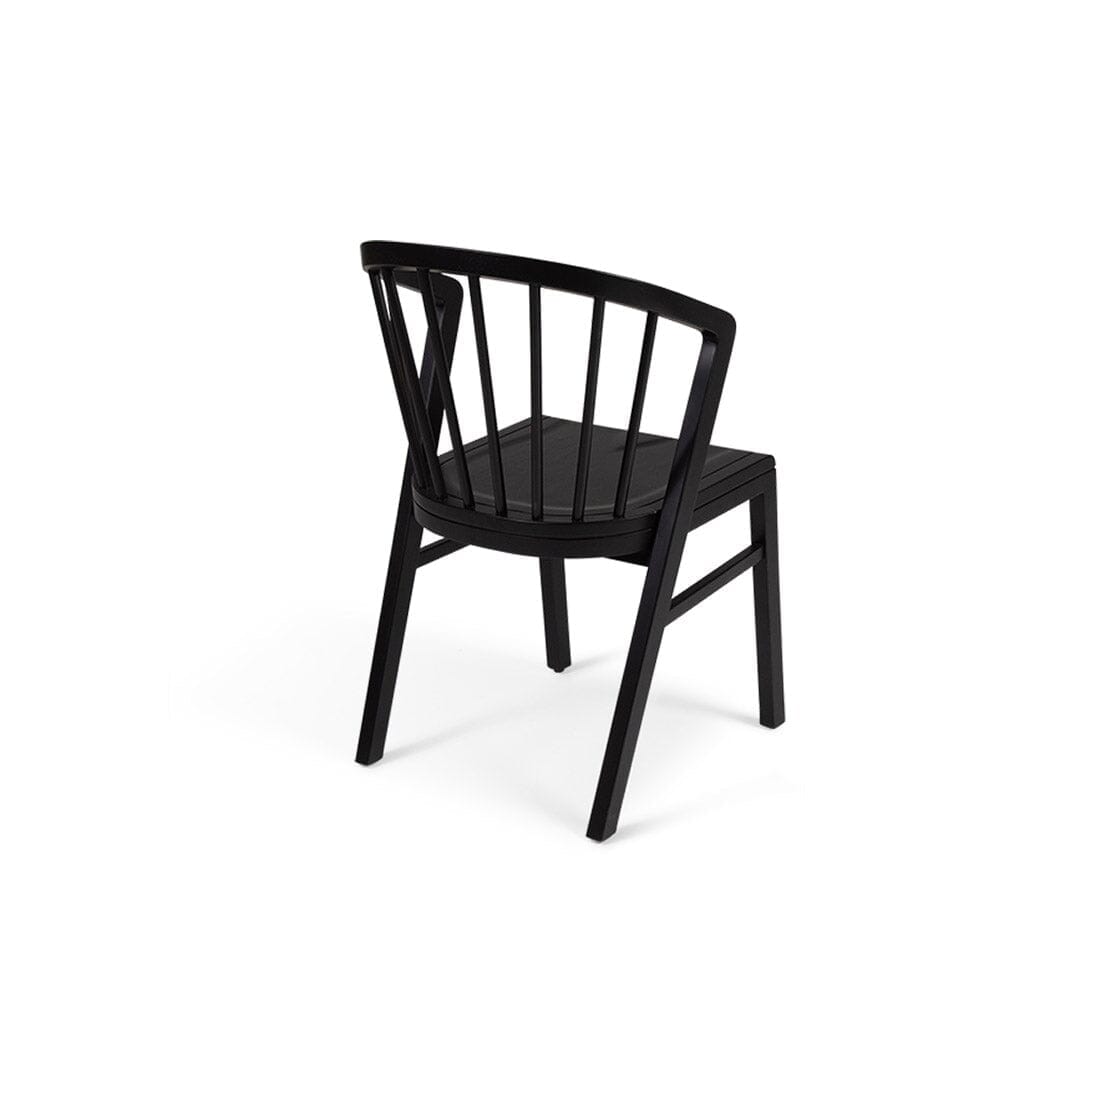 Amelia Black Dining Table Set - 6 Seater - Black Spindle Back Chairs